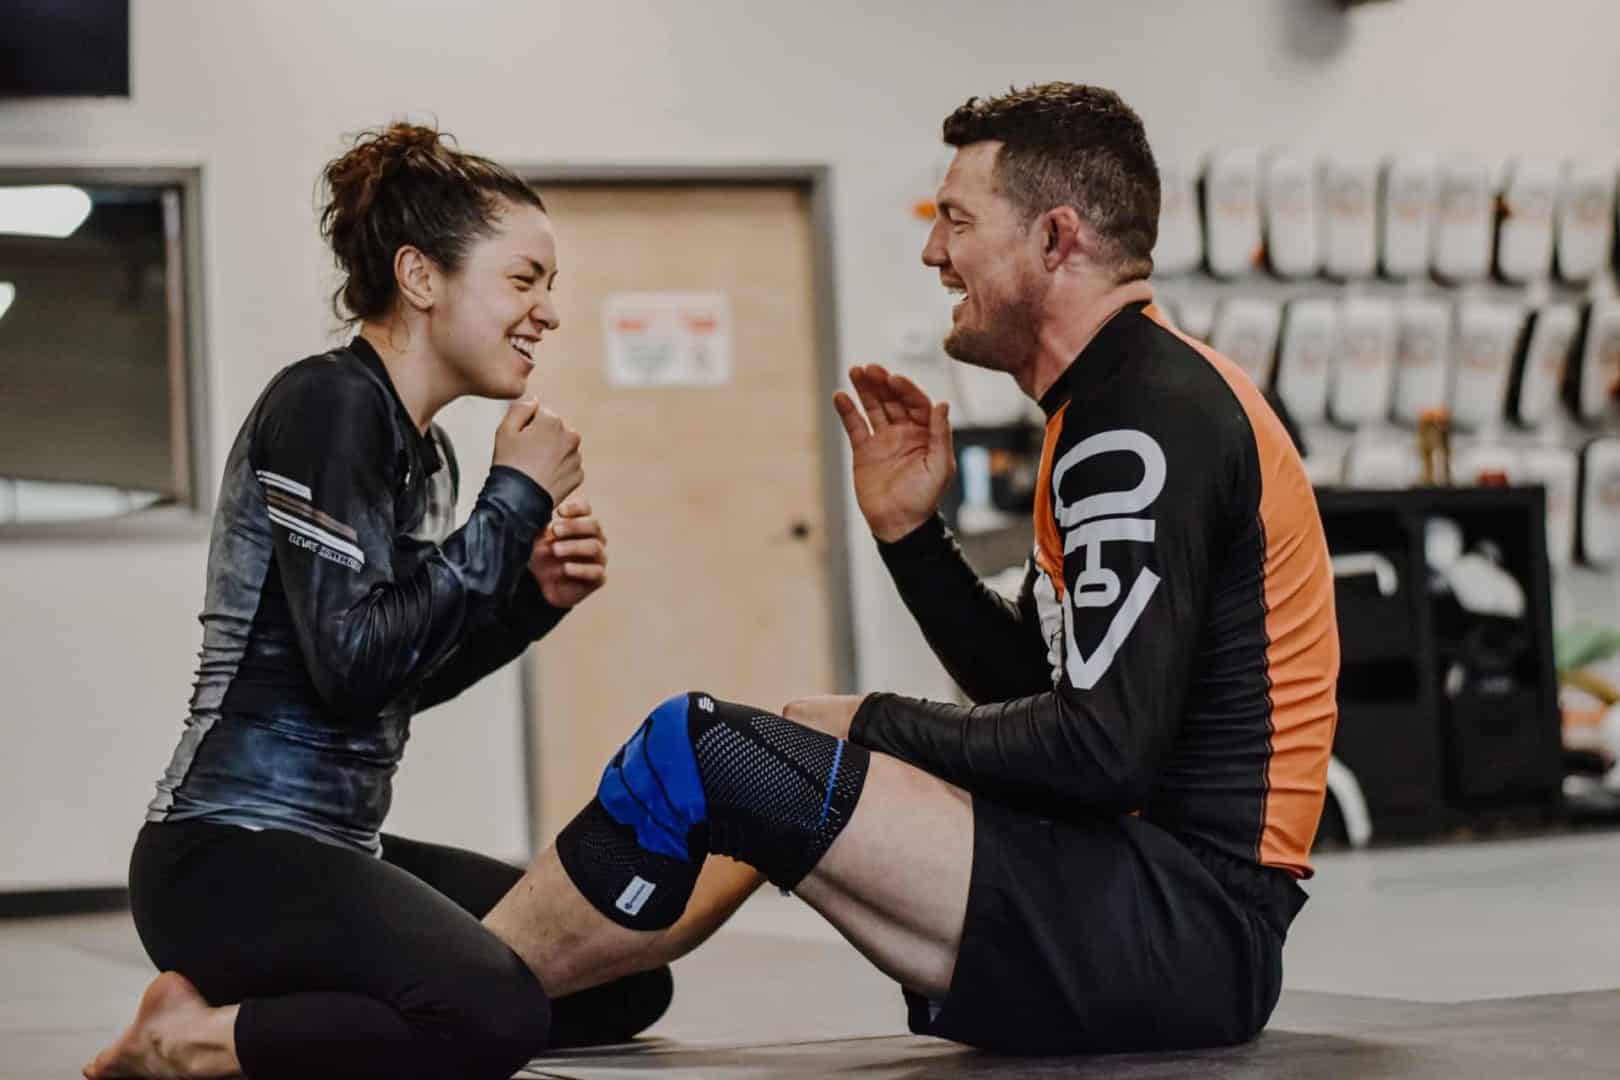 Woman and Man smiling and having fun about to get a roll in jiu jitsu at SBG